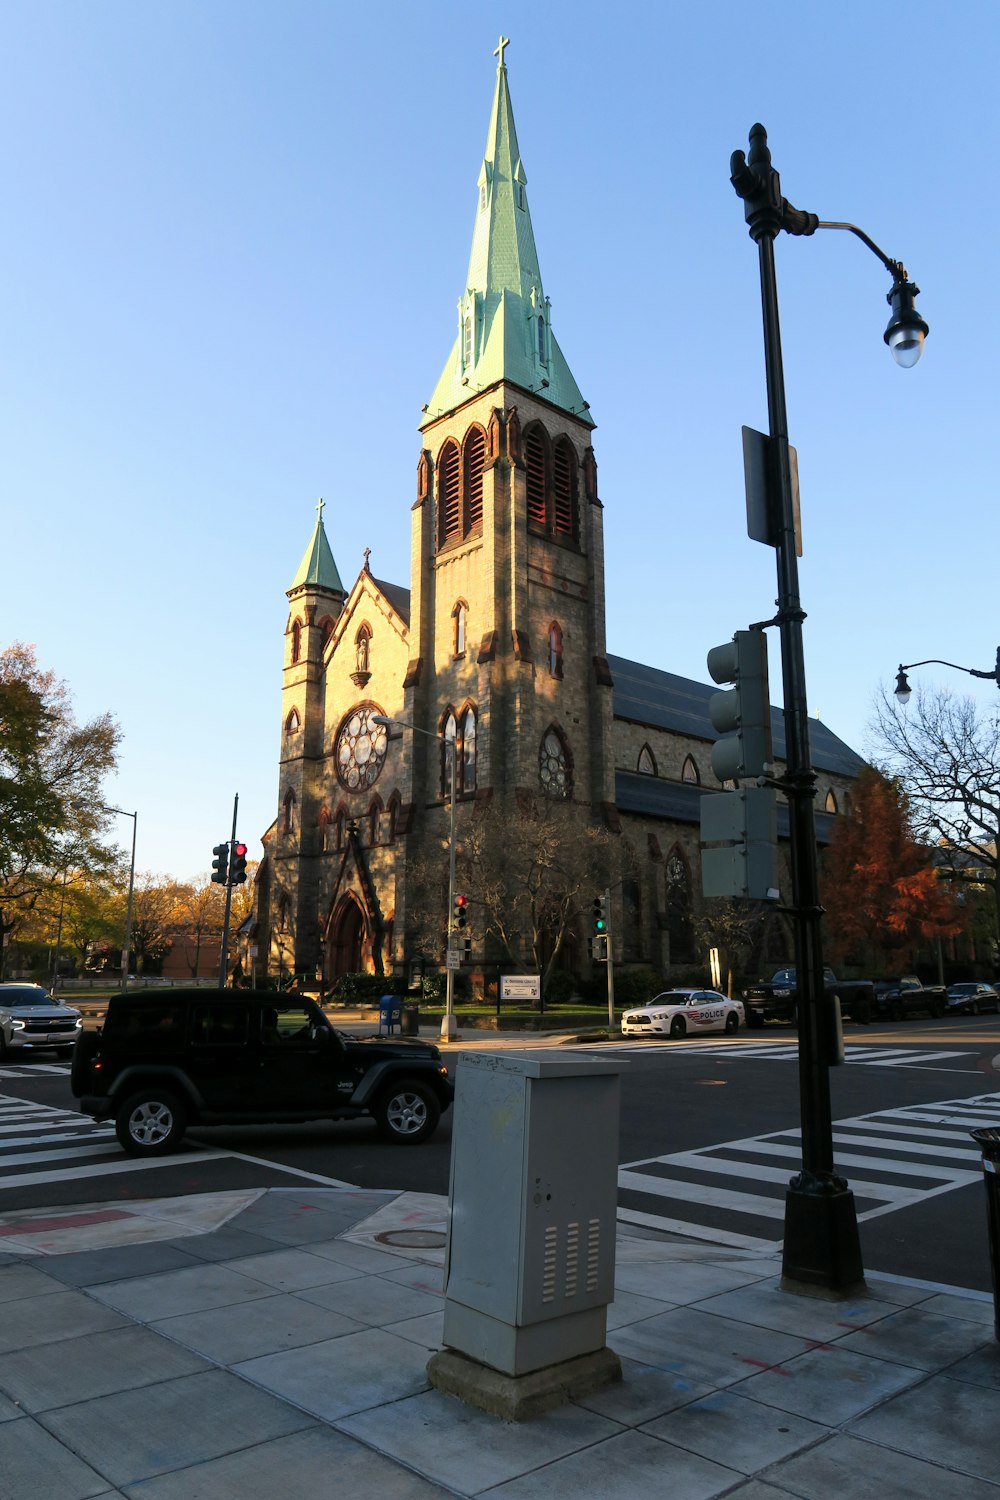 a large church with a steeple and a clock tower